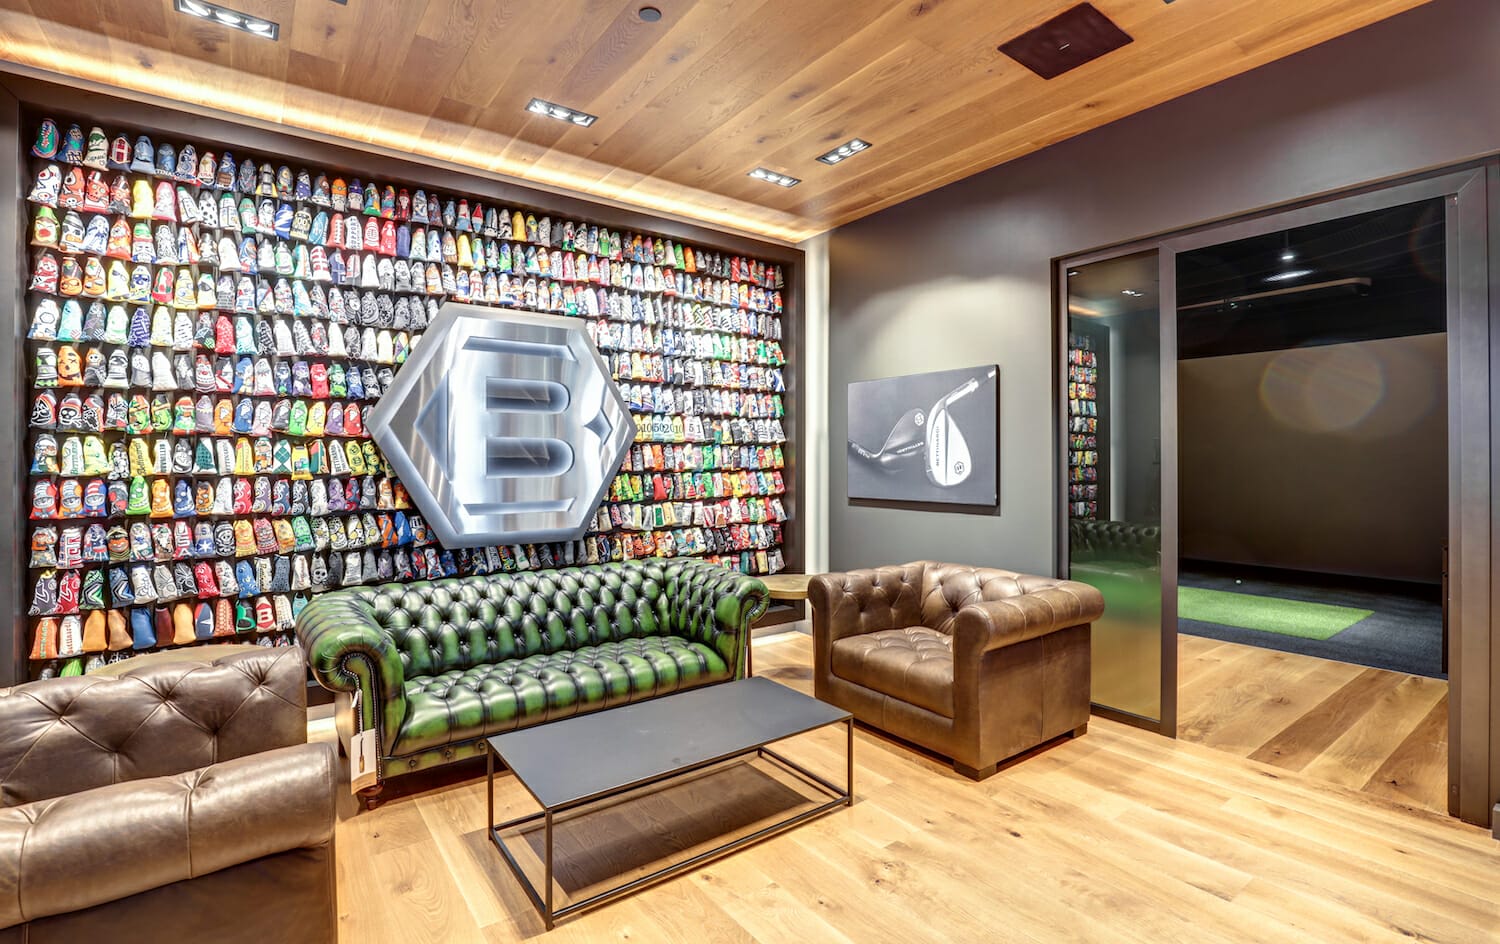 Skender Completes Construction on Bettinardi Golf’s New Retail Location in Oak Brook